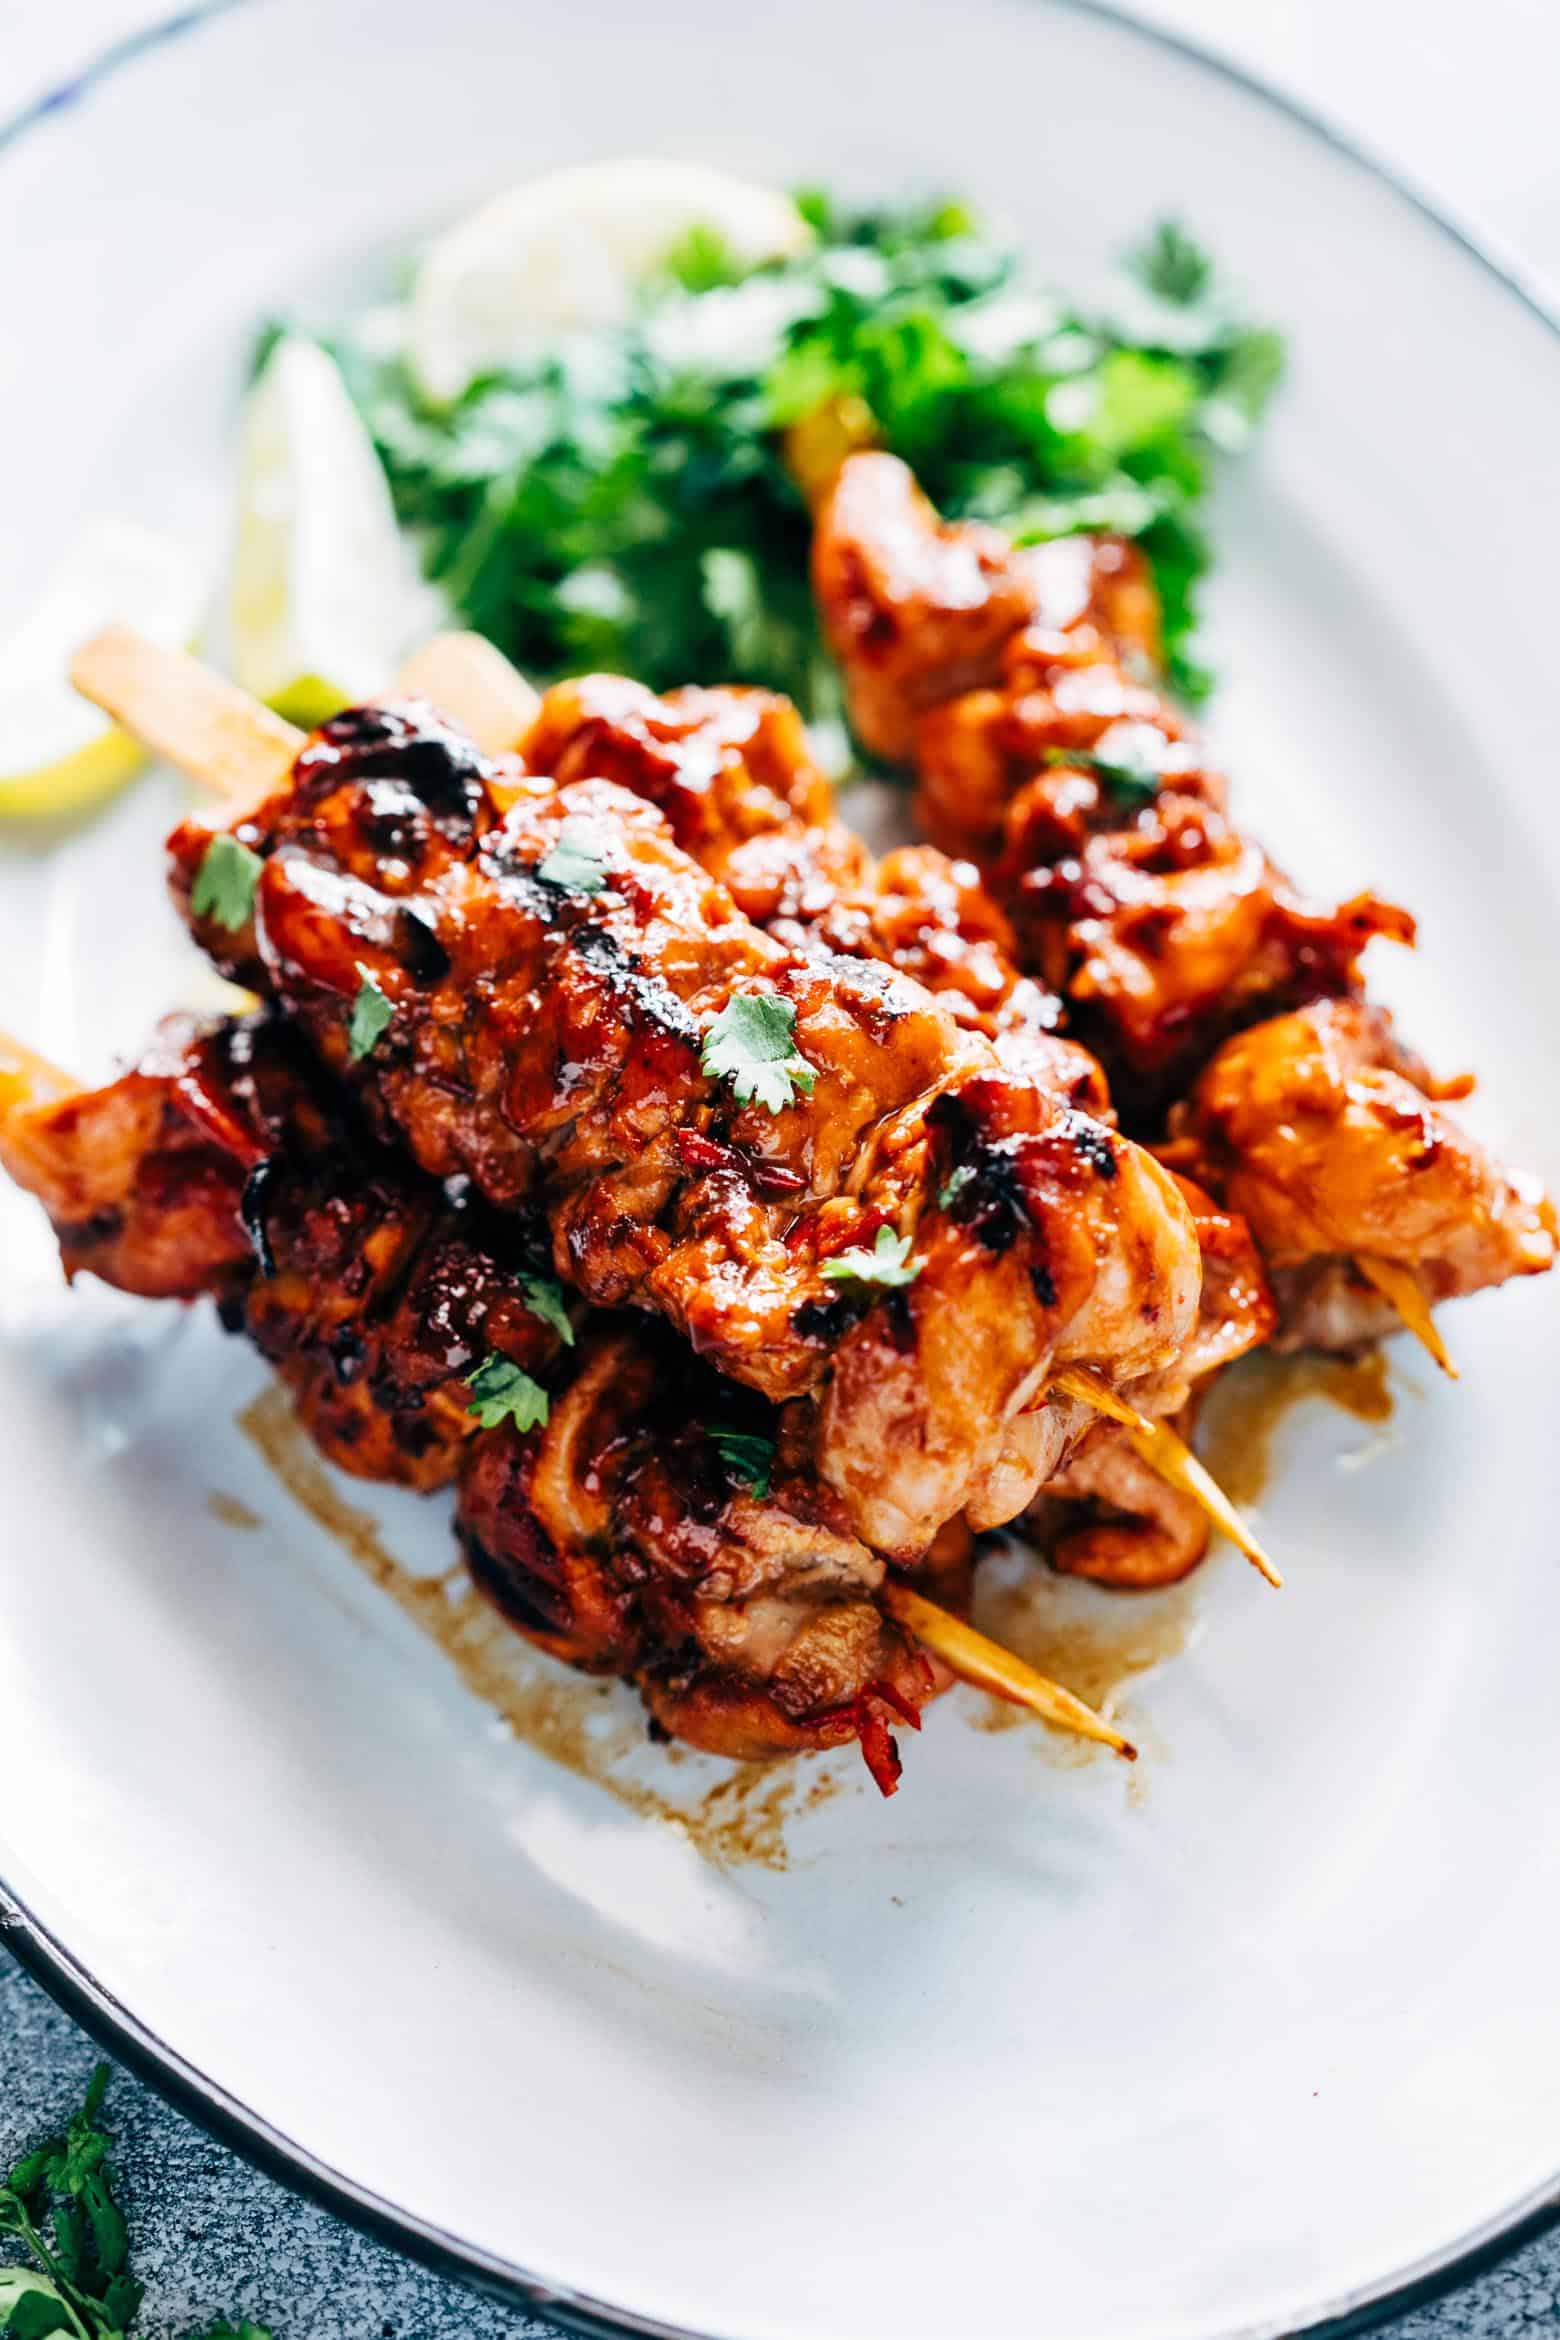 Grilled Sambal Chicken Skewers is an easy, 5 ingredient recipe thats spicy, sweet and sticky! Its a chinese style recipe with sambal oelek, soy sauce and lemon grass.